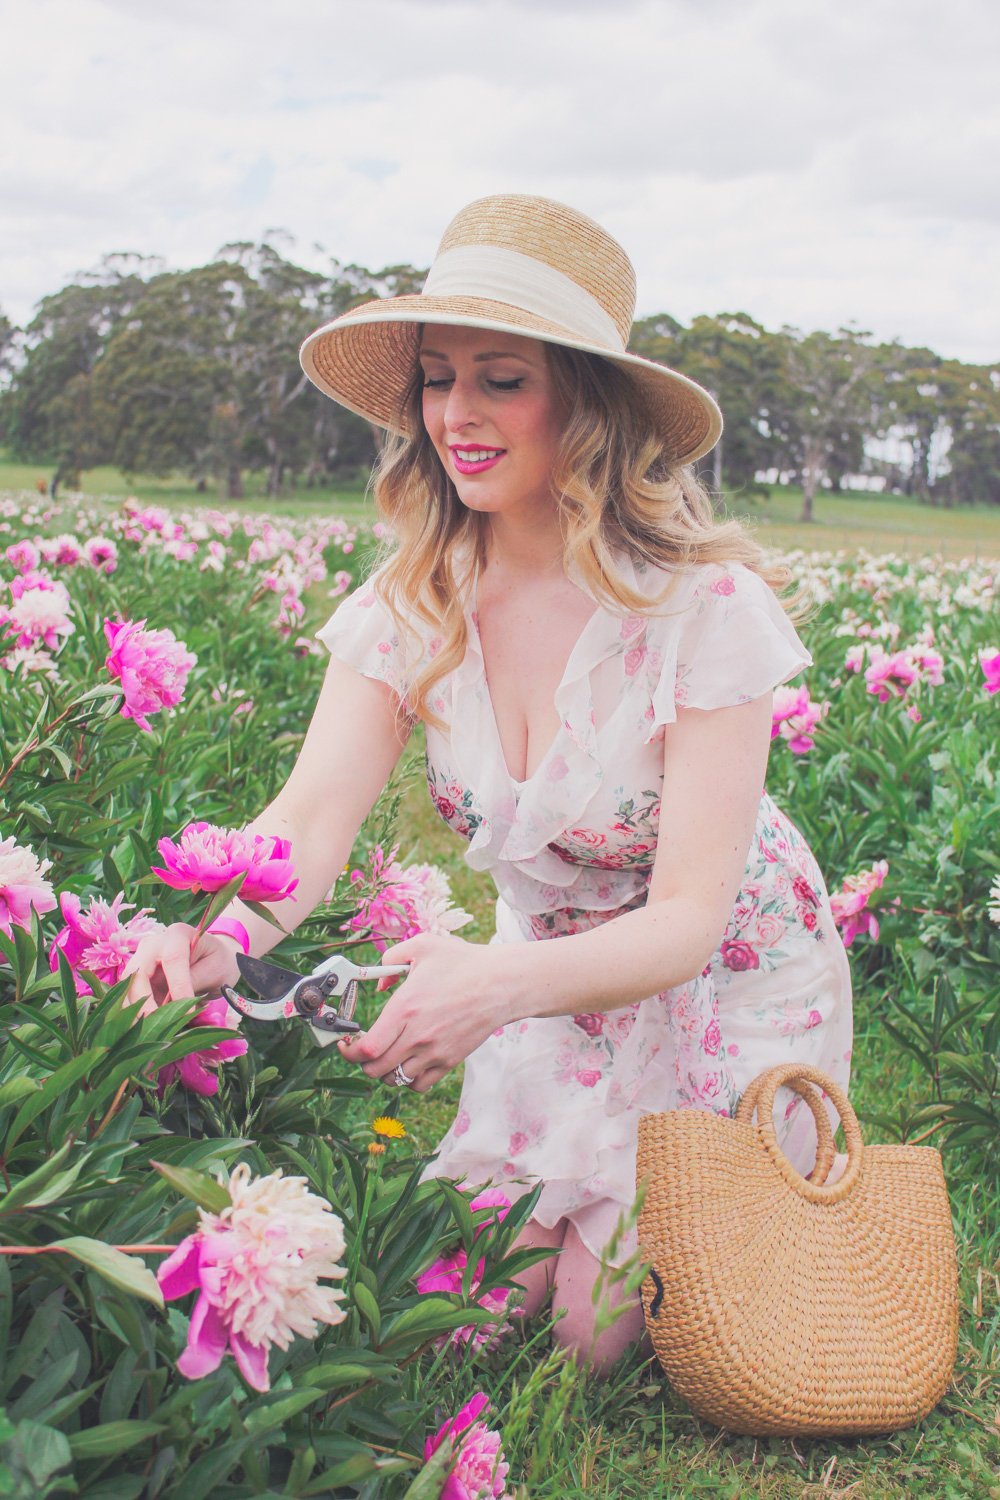 Goldfields Girl picking peony roses in the Peony Paddock at Spring Hill Peony Farm wearing an Alannah Hill dress and straw hat